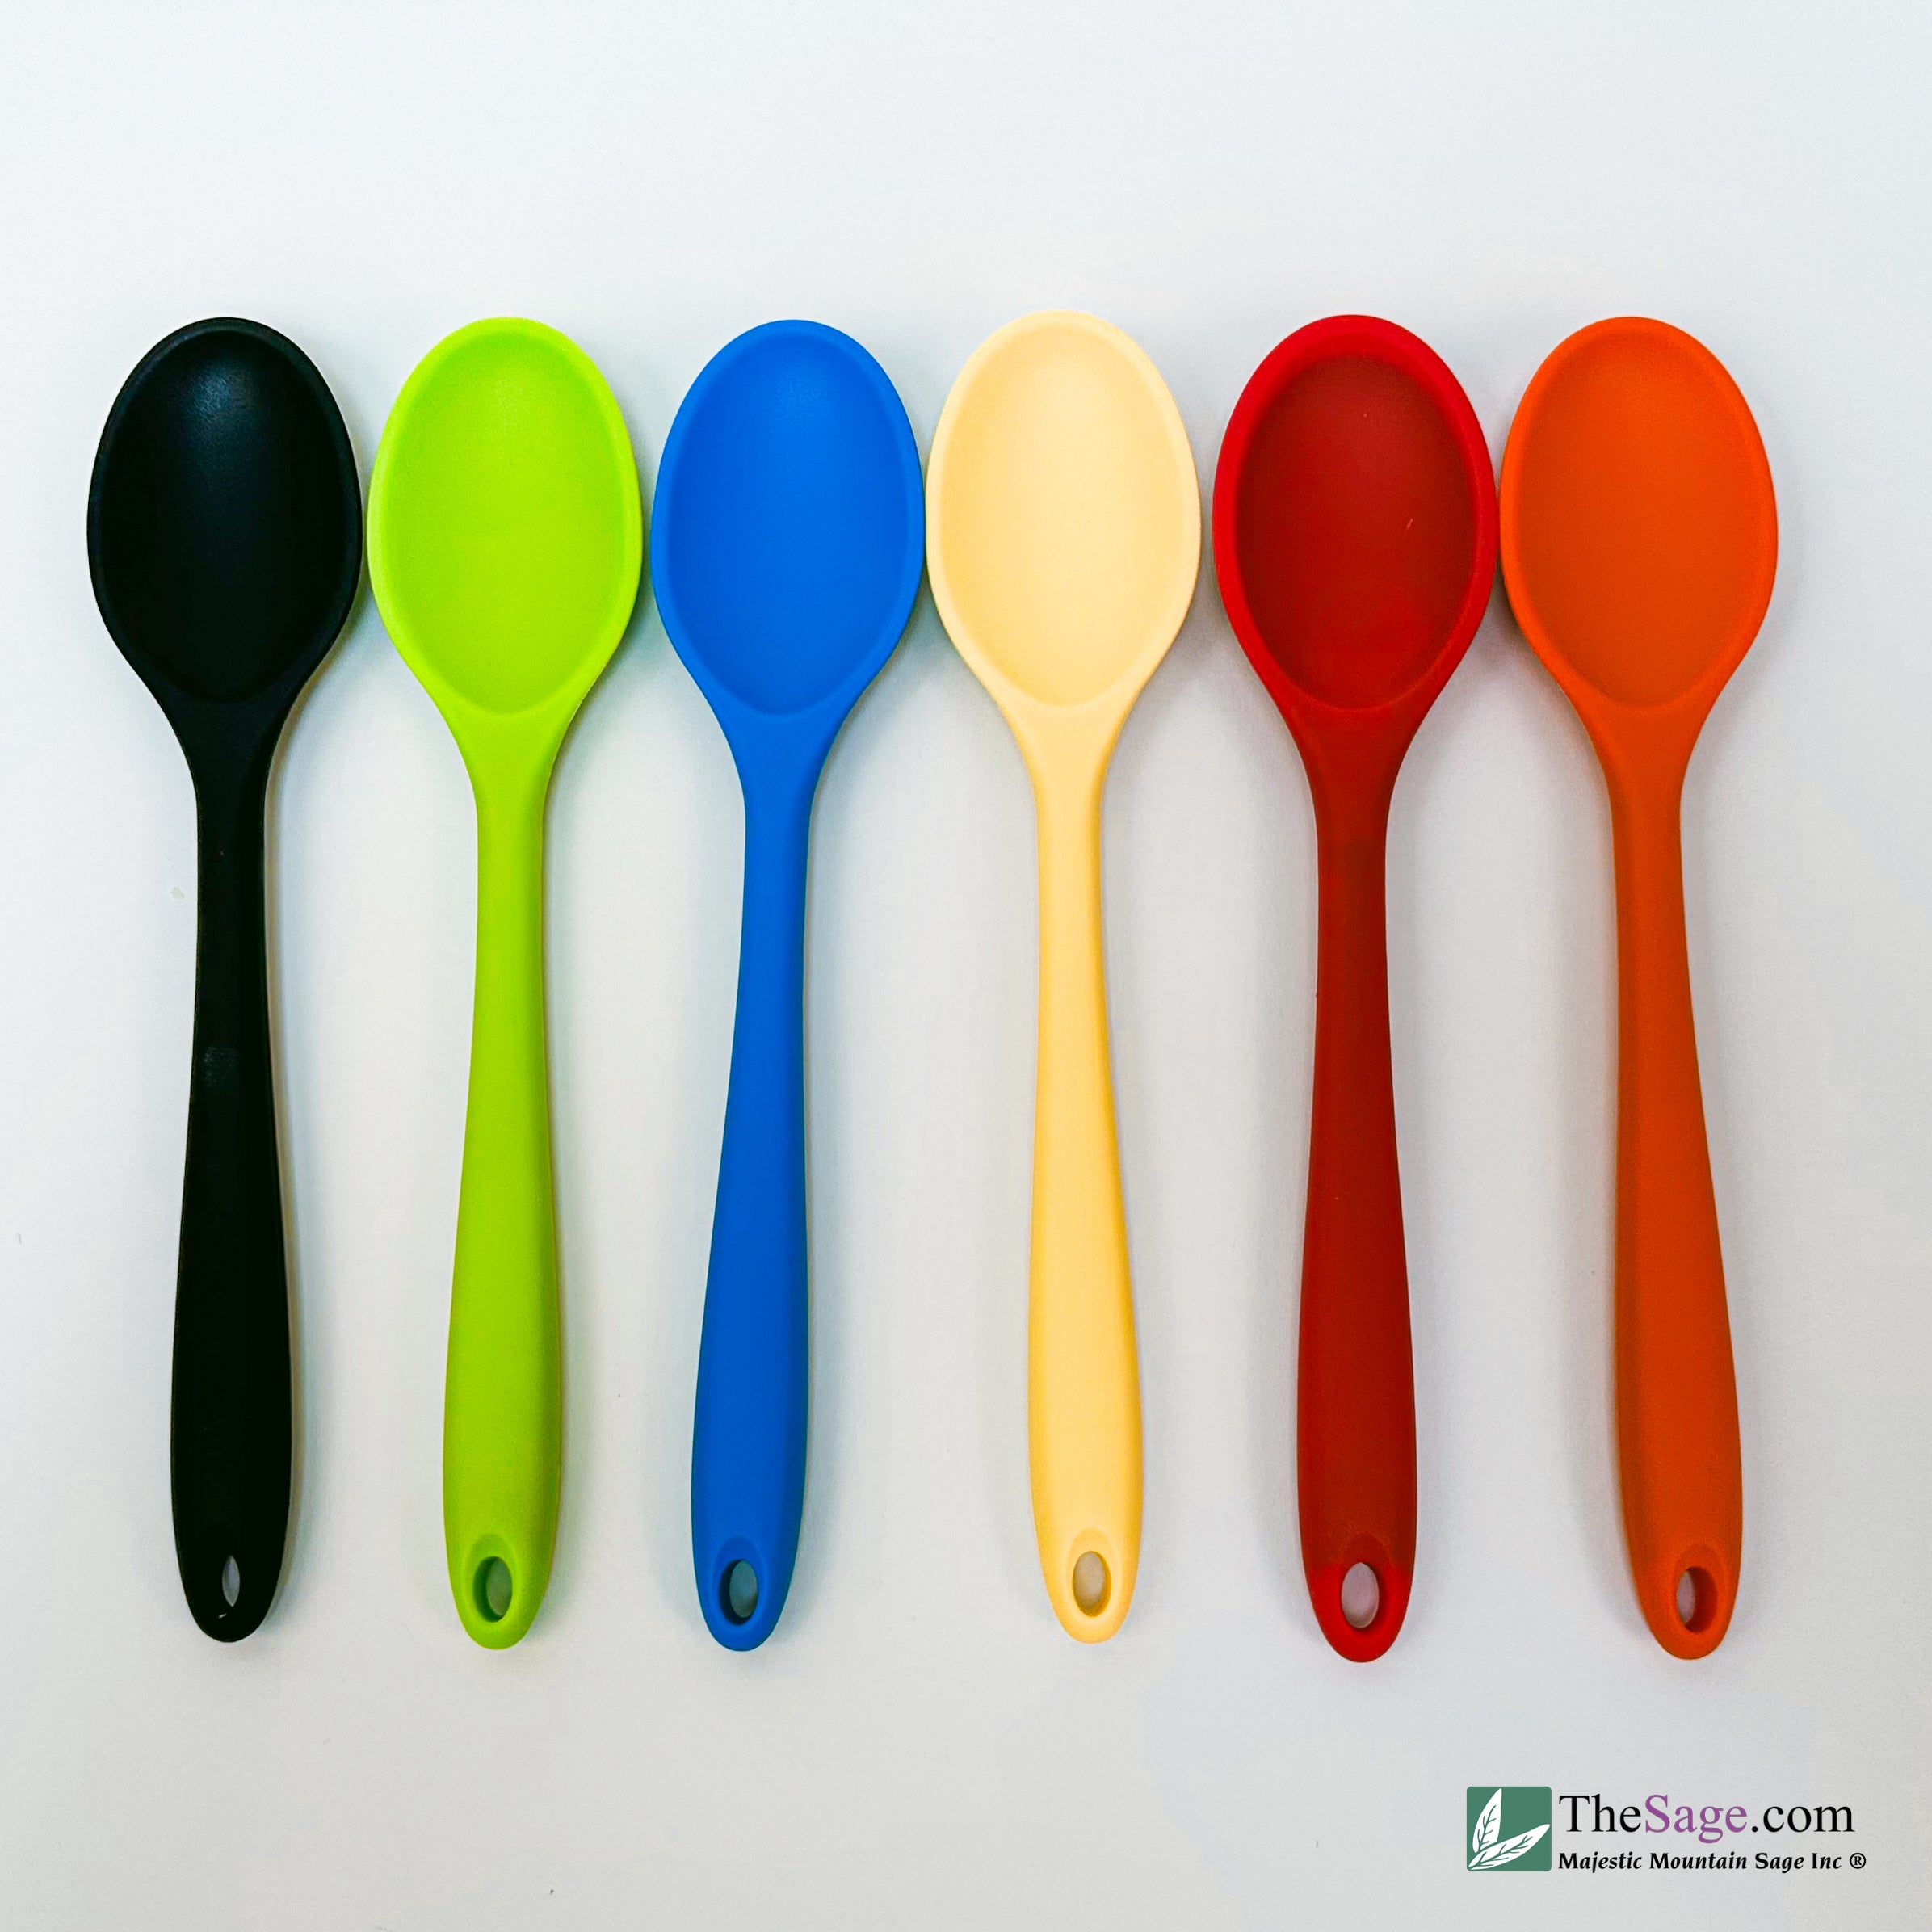  Silicone Cooking Utensils